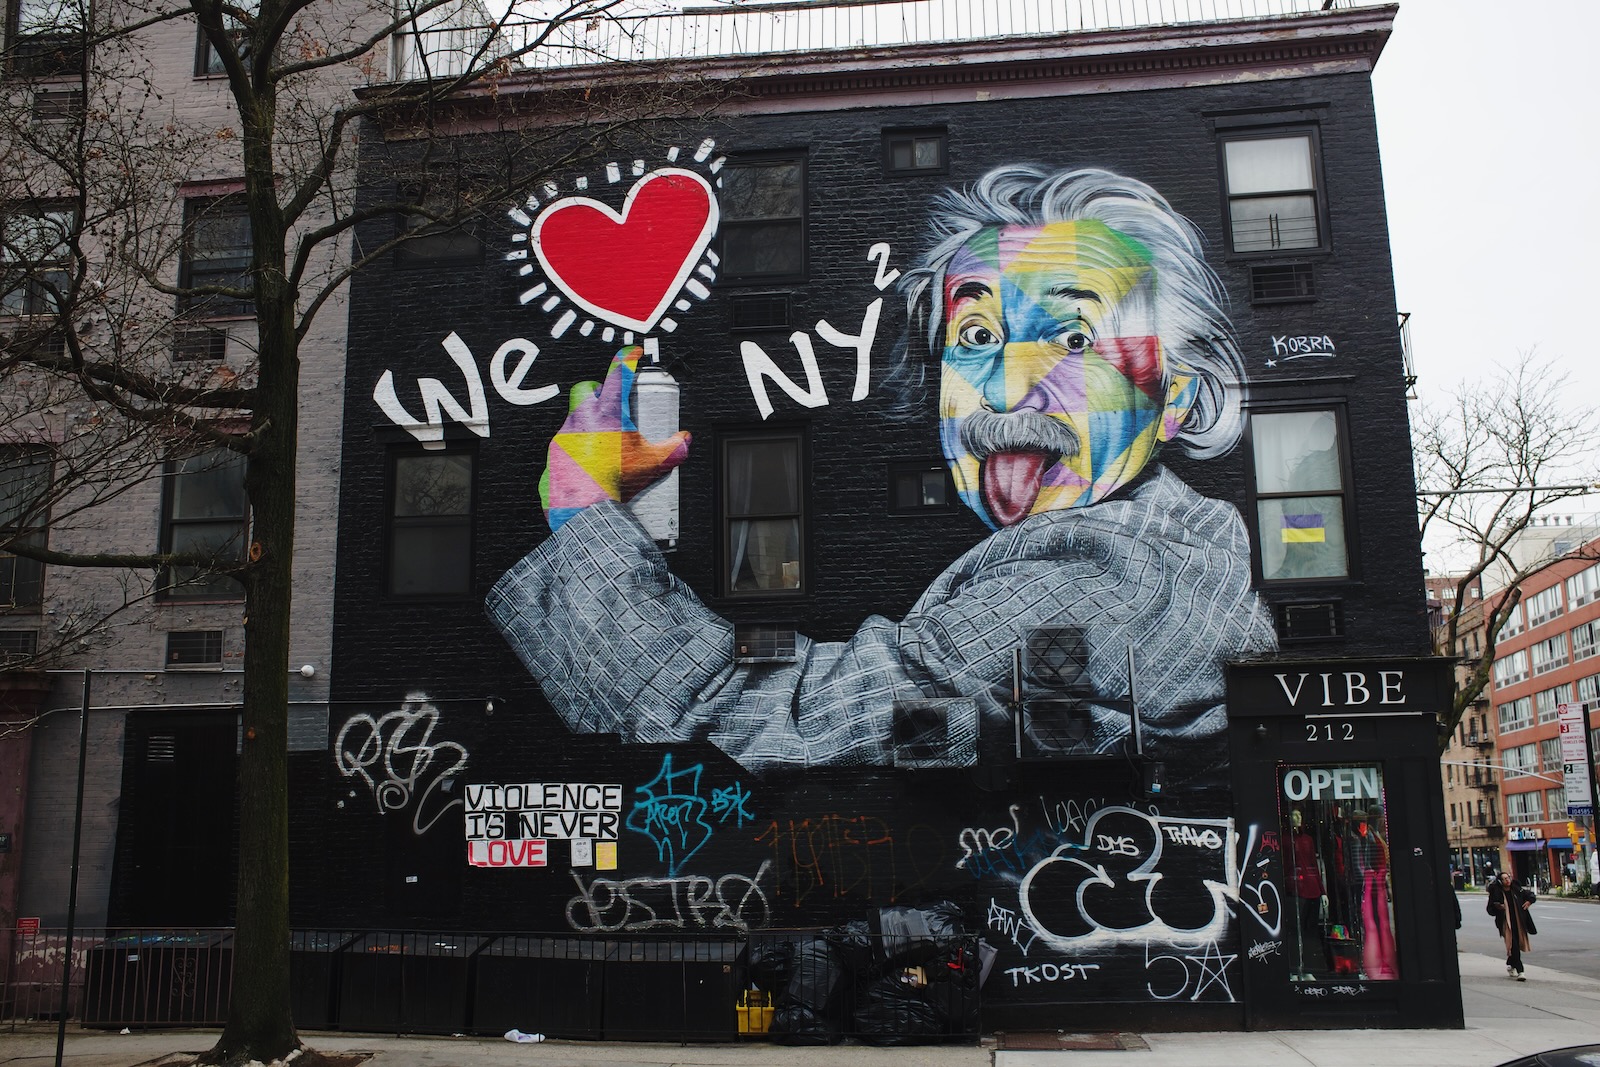 A mural on a black wall, with Albert Einstein portrayed spray-painting a message “We ❤️ NY.”